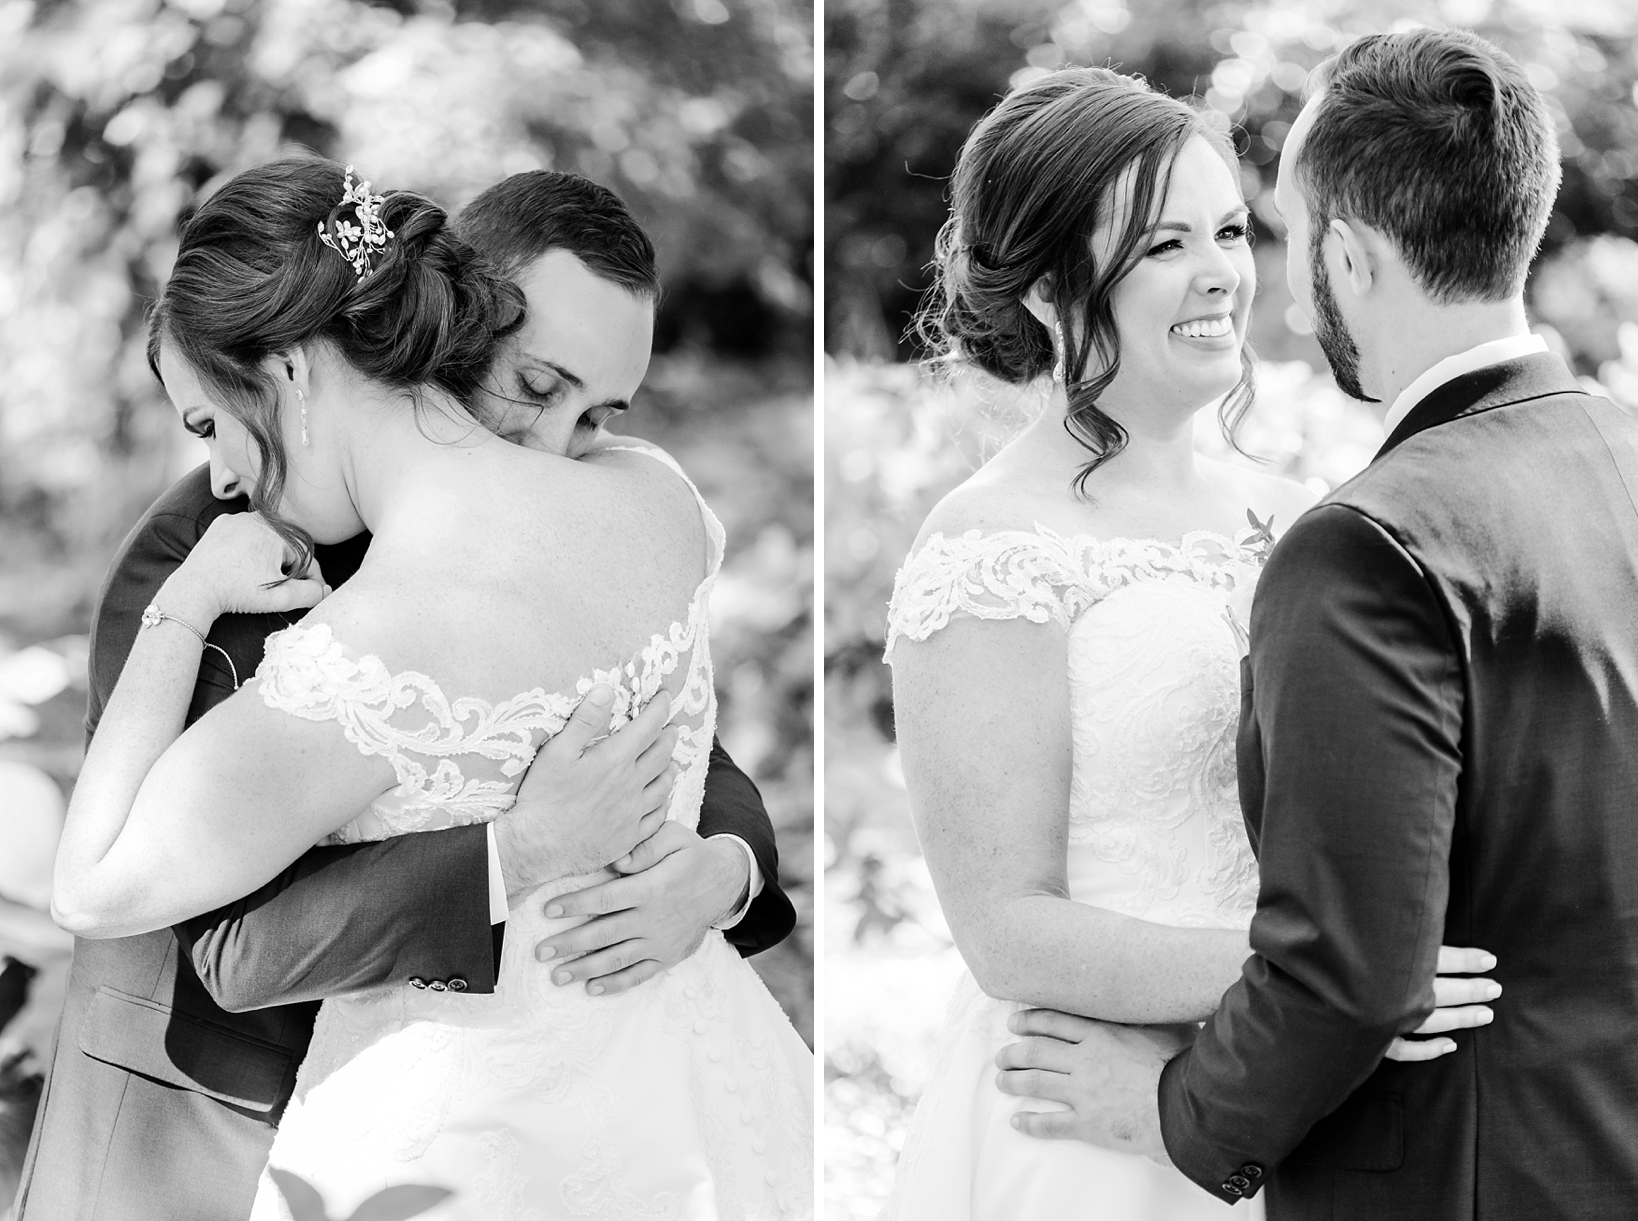 The Bride and Groom share a sweet moment seeing each other for the first time on their wedding day